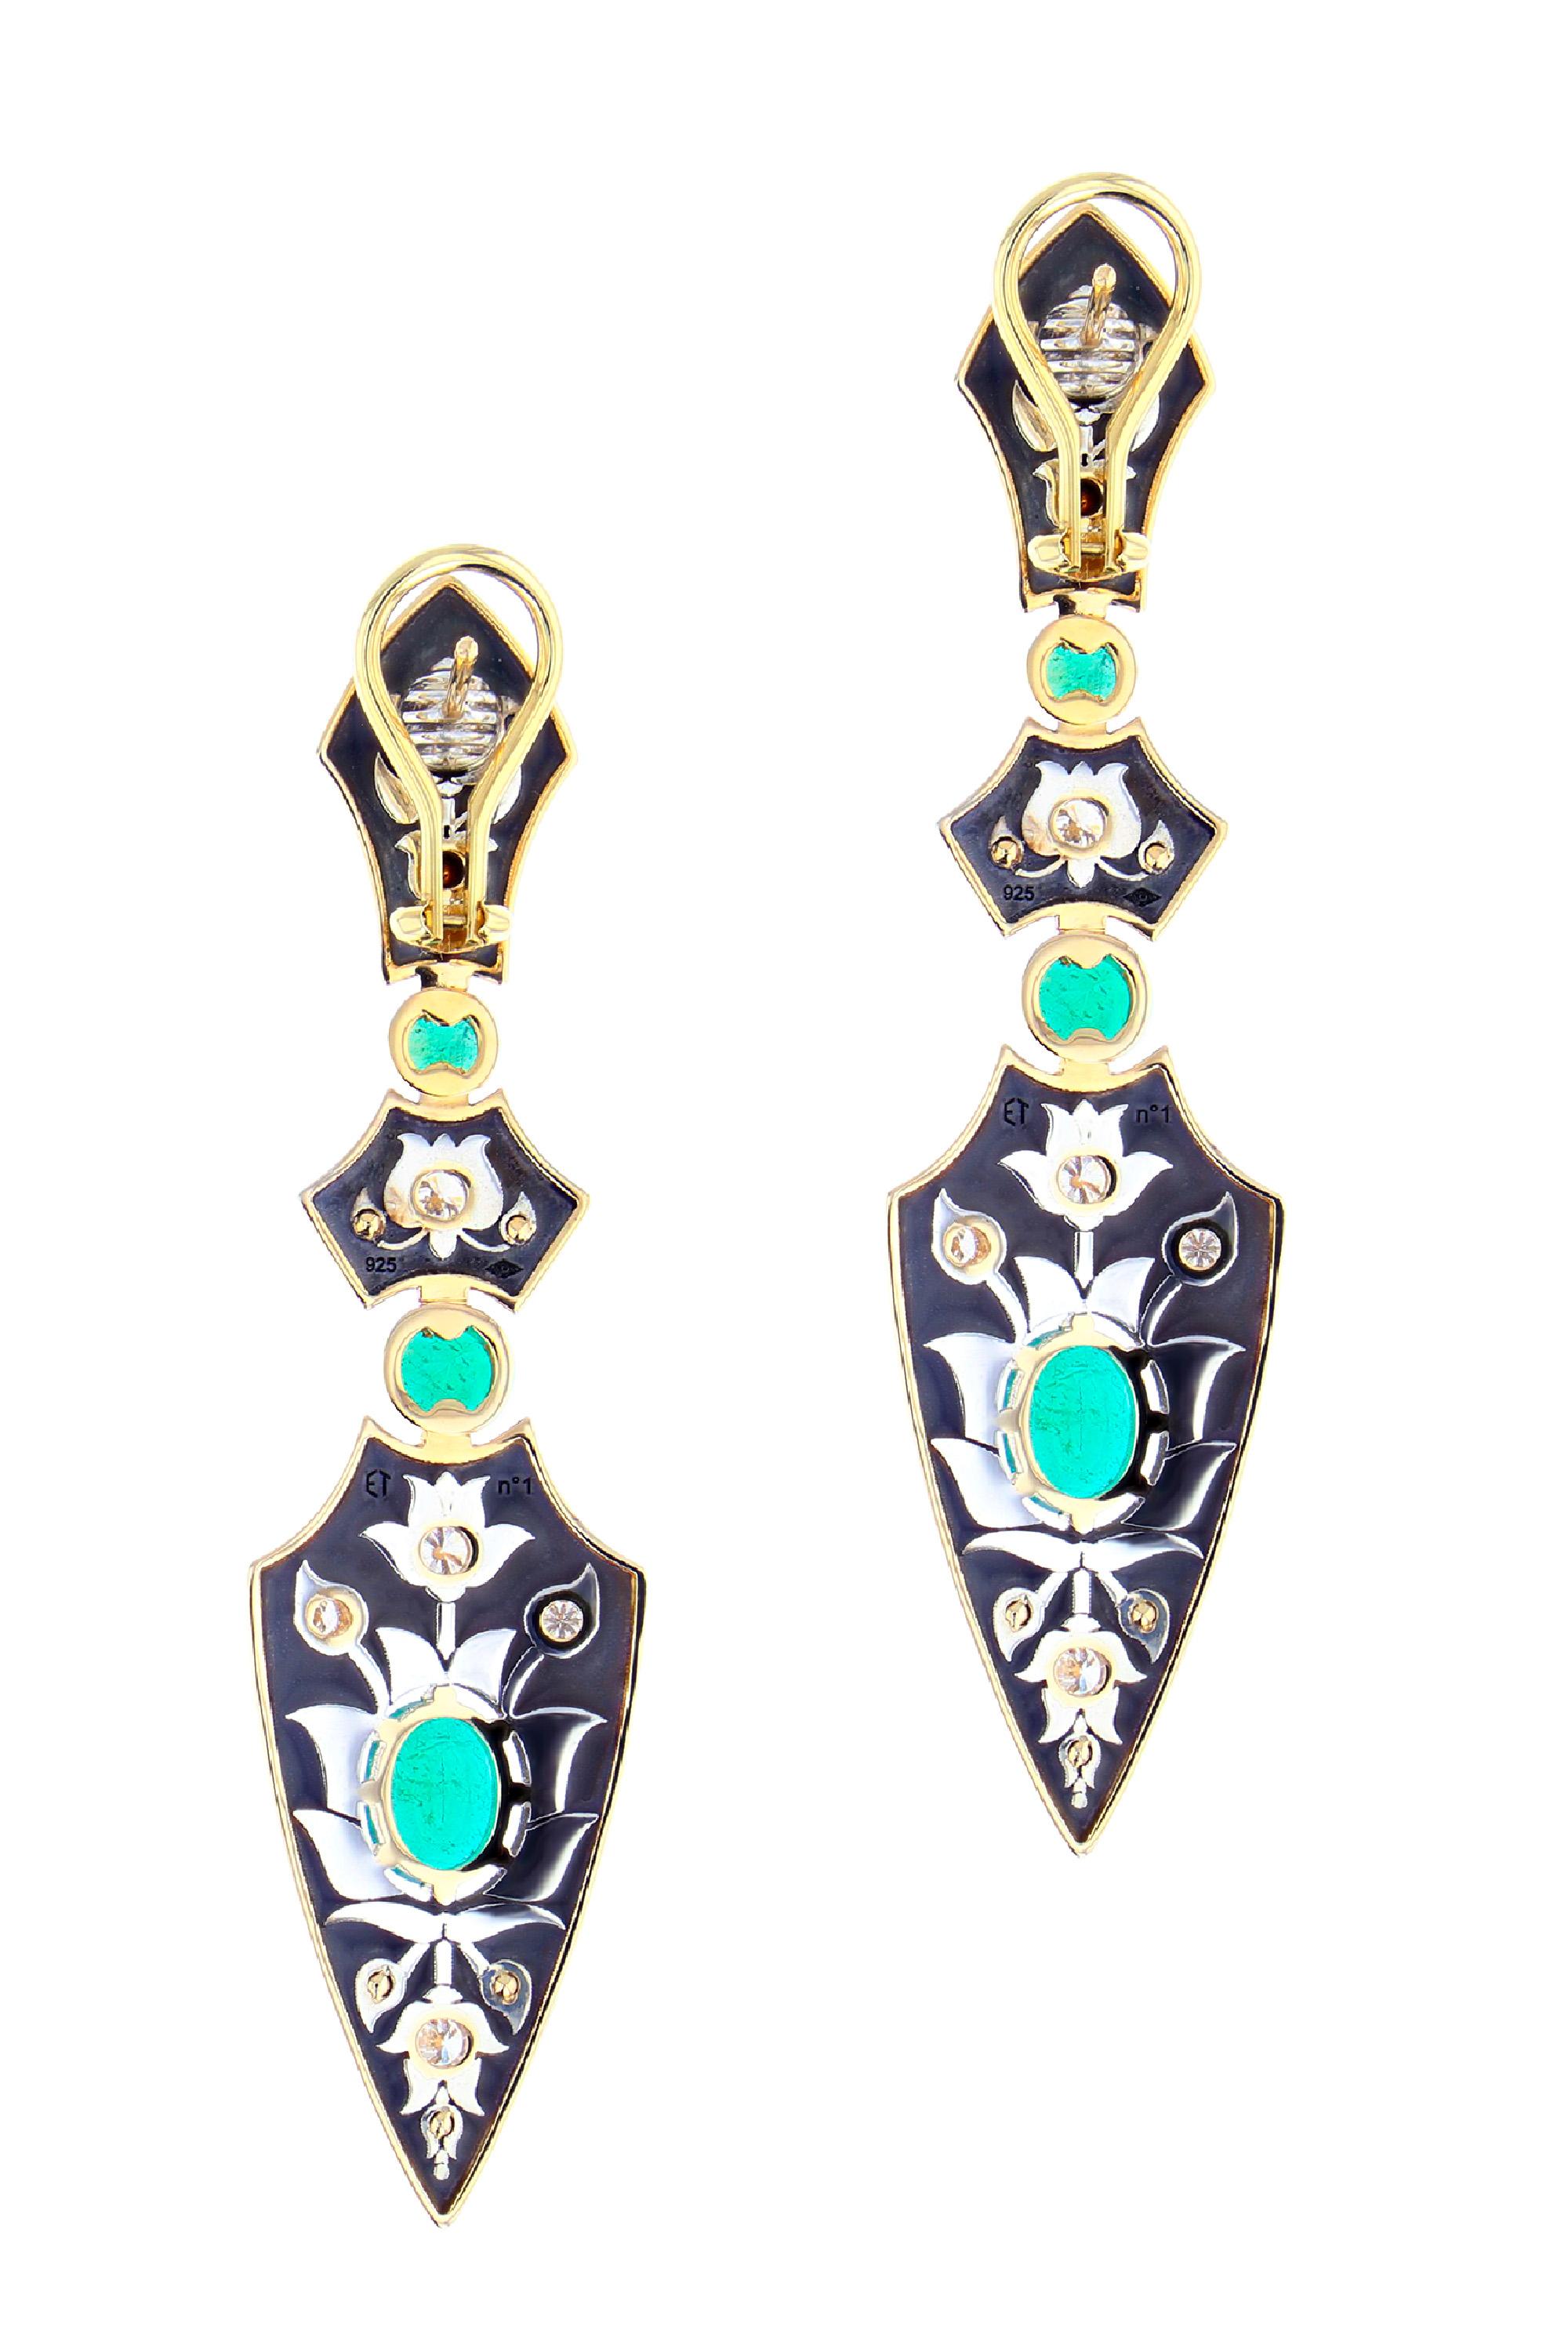 Yellow gold and distressed silver lance earrings, studded with oval and round emeralds, diamonds and yellow gold. 

Details:
Diamonds: 1 cts
Central Emerald : 2.6 cts
Round Emeralds: 1.86 cts
18k Yellow Gold: 15 g     
Distressed Silver: 10 g 
Made